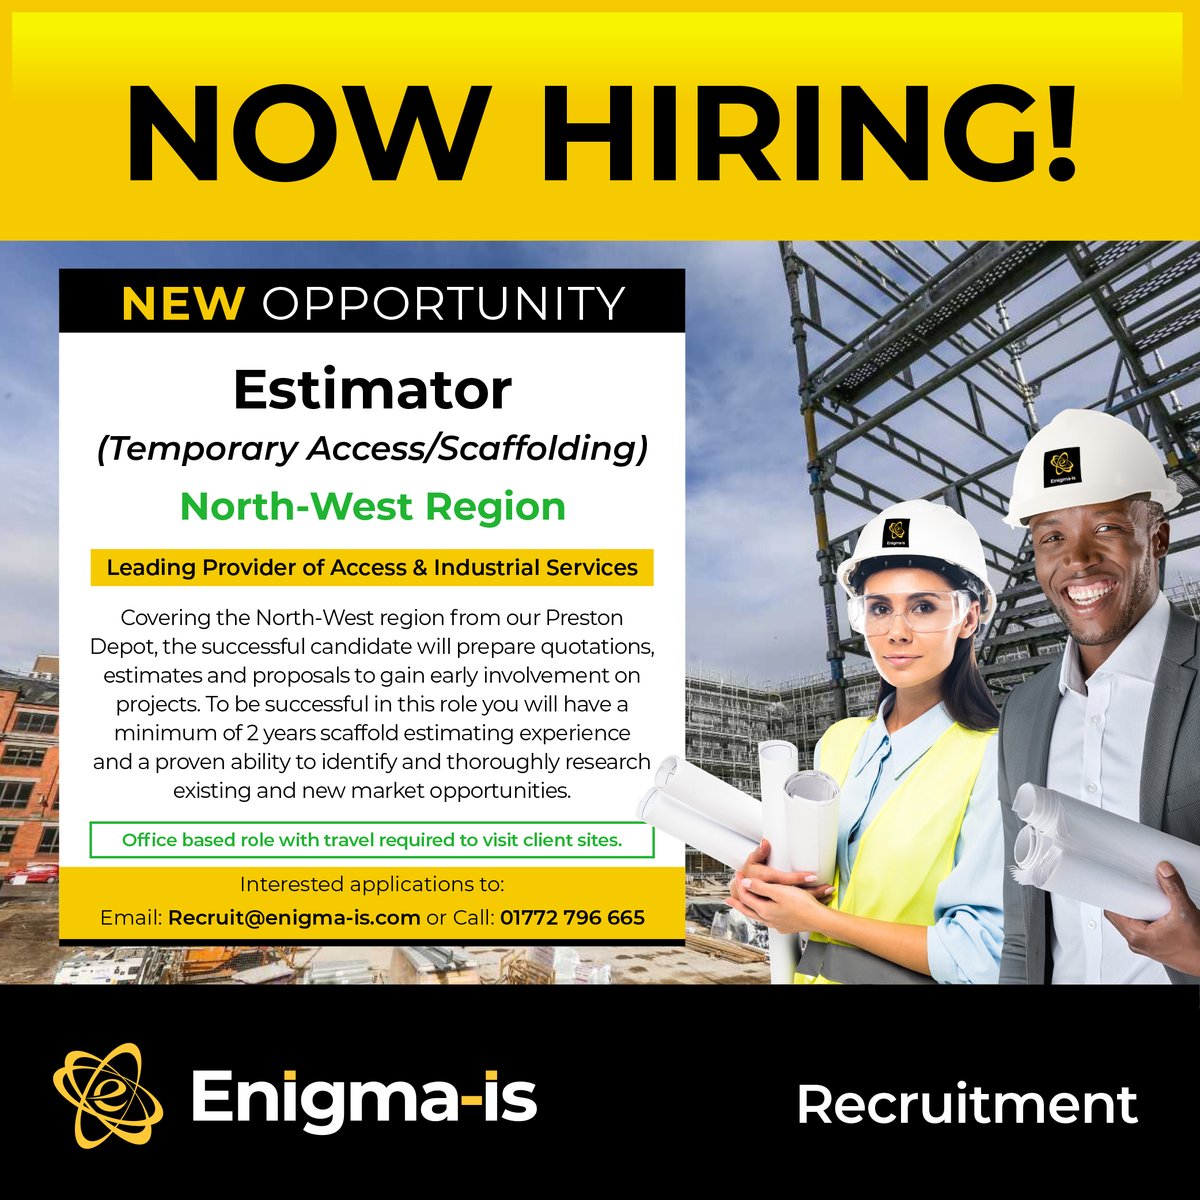 We’re Hiring! - Estimator Leading Provider of Temporary Access & Industrial Services North-West Region Call: 01772 796 665 Submit your CV online enigma-is.com/submit-cv/ Email your CV with a cover letter to: recruit@enigma-is.com #Jobs #Scaffolding #NorthWest #Estimator